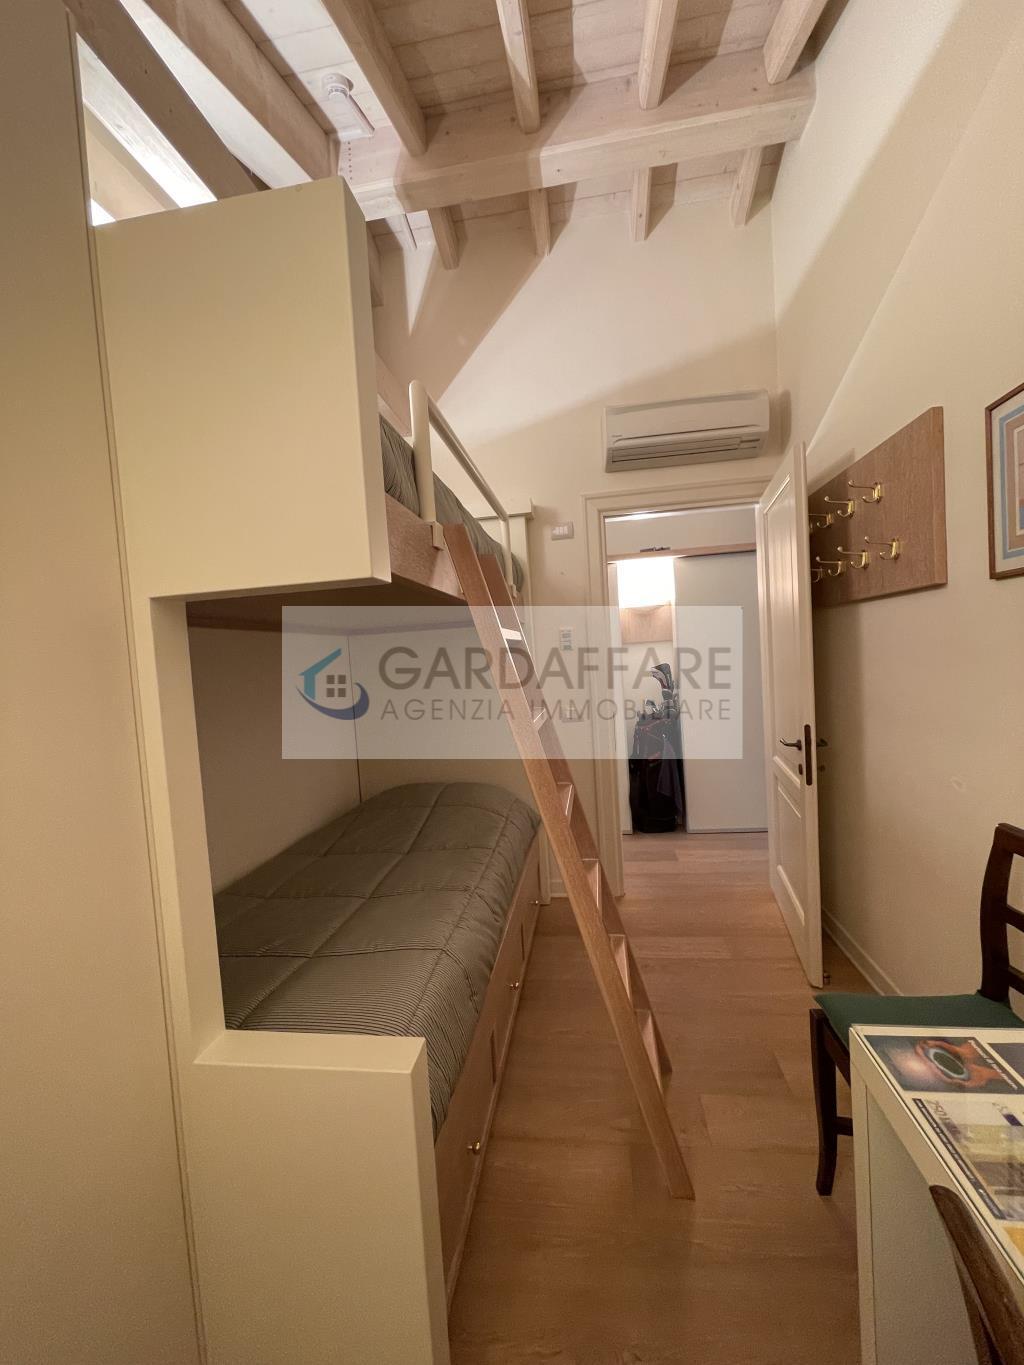 Flat Luxury Properties for Buy in Pozzolengo - Cod. h19-22-39